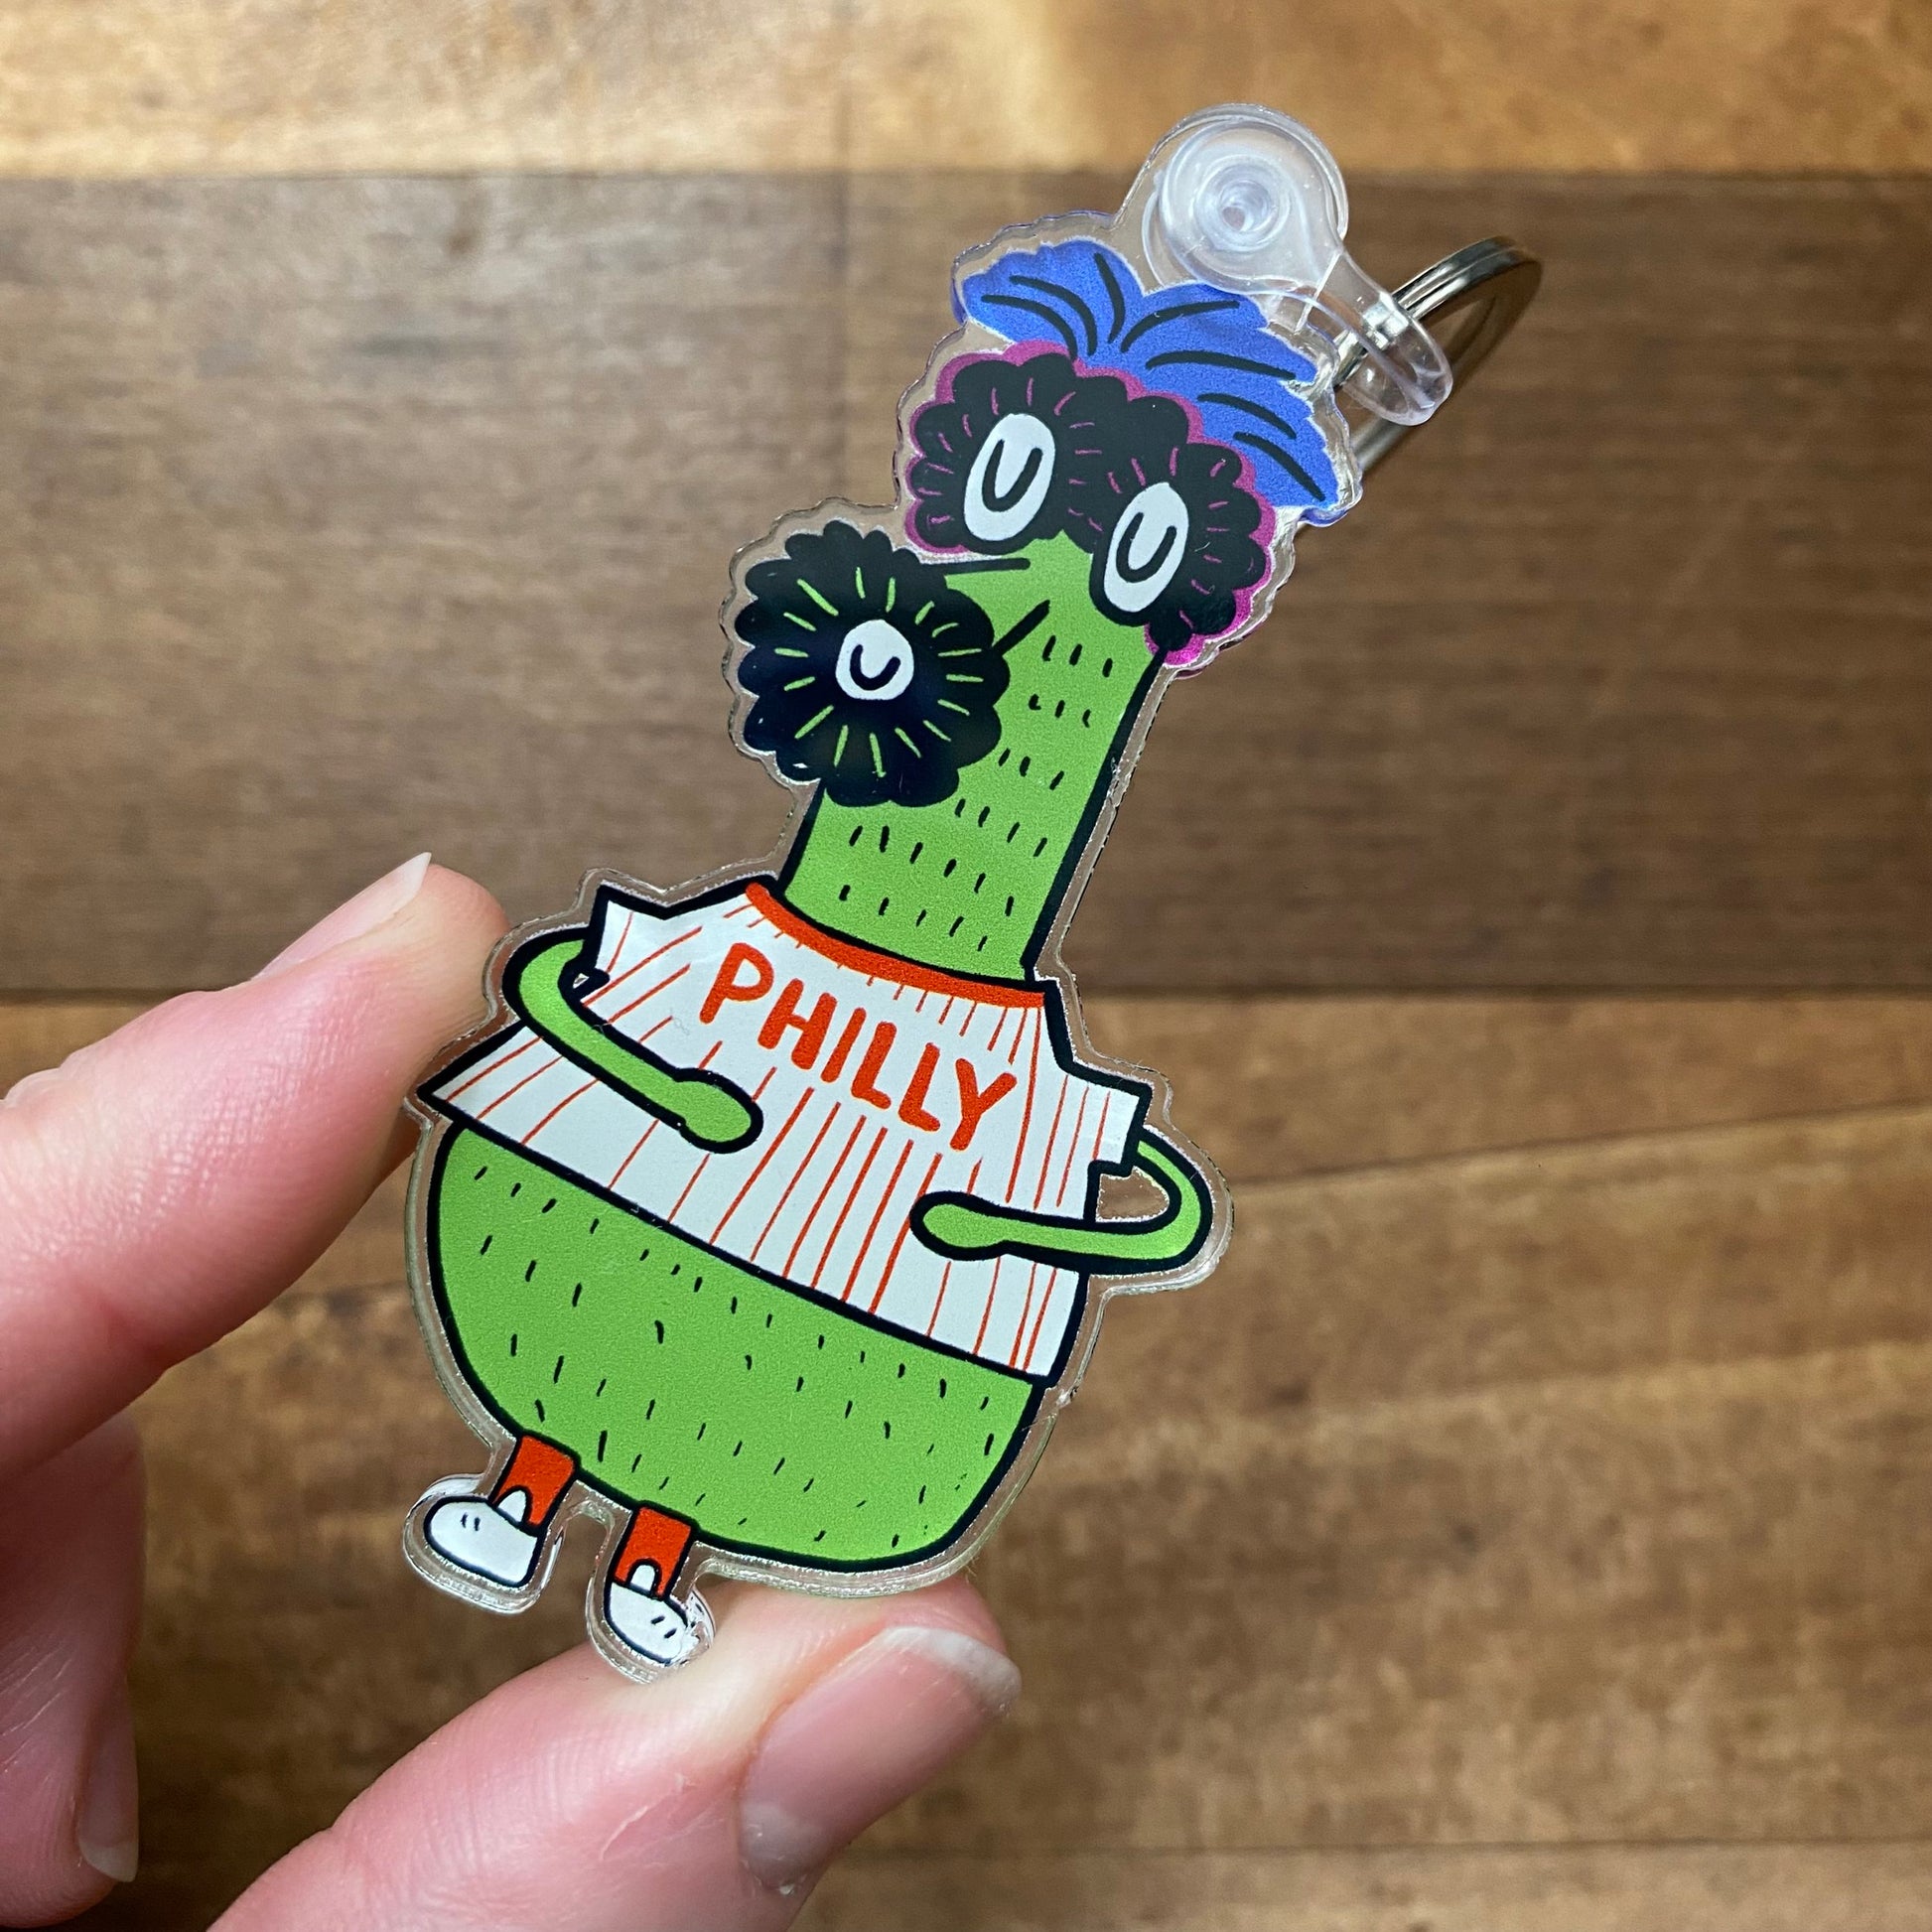 A hand holds an Ana Thorne Gritty & Phanatic Keychain featuring a cartoonish green character with glasses, a blue topknot, and a white "Philly" shirt.